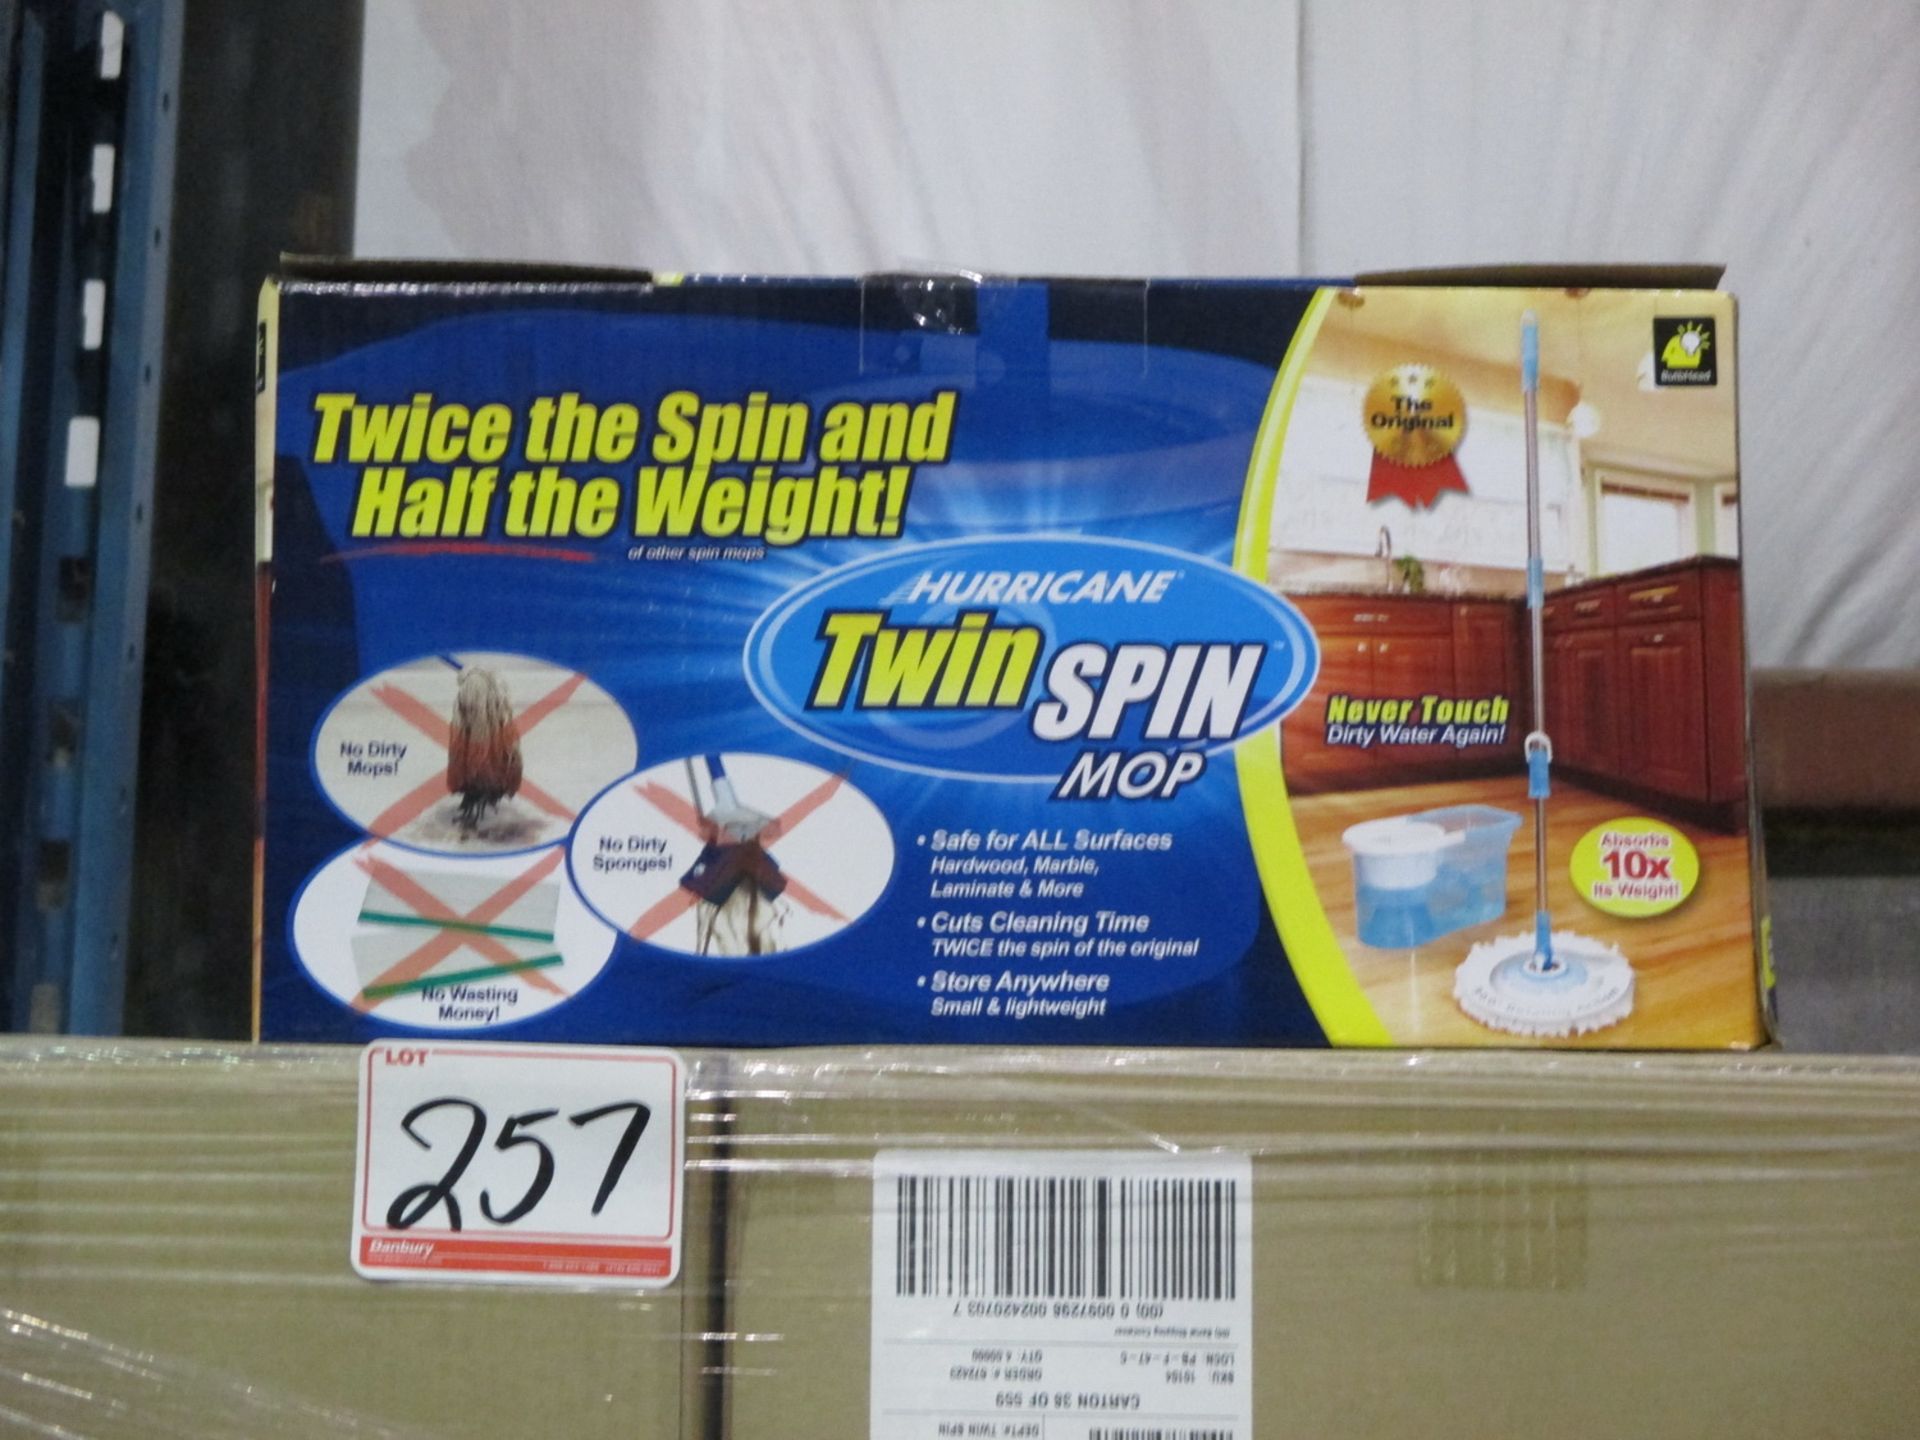 PIECES - HURRICANE TWIN SPIN MOPS (4 PCS/BOX - 11 BOXES)